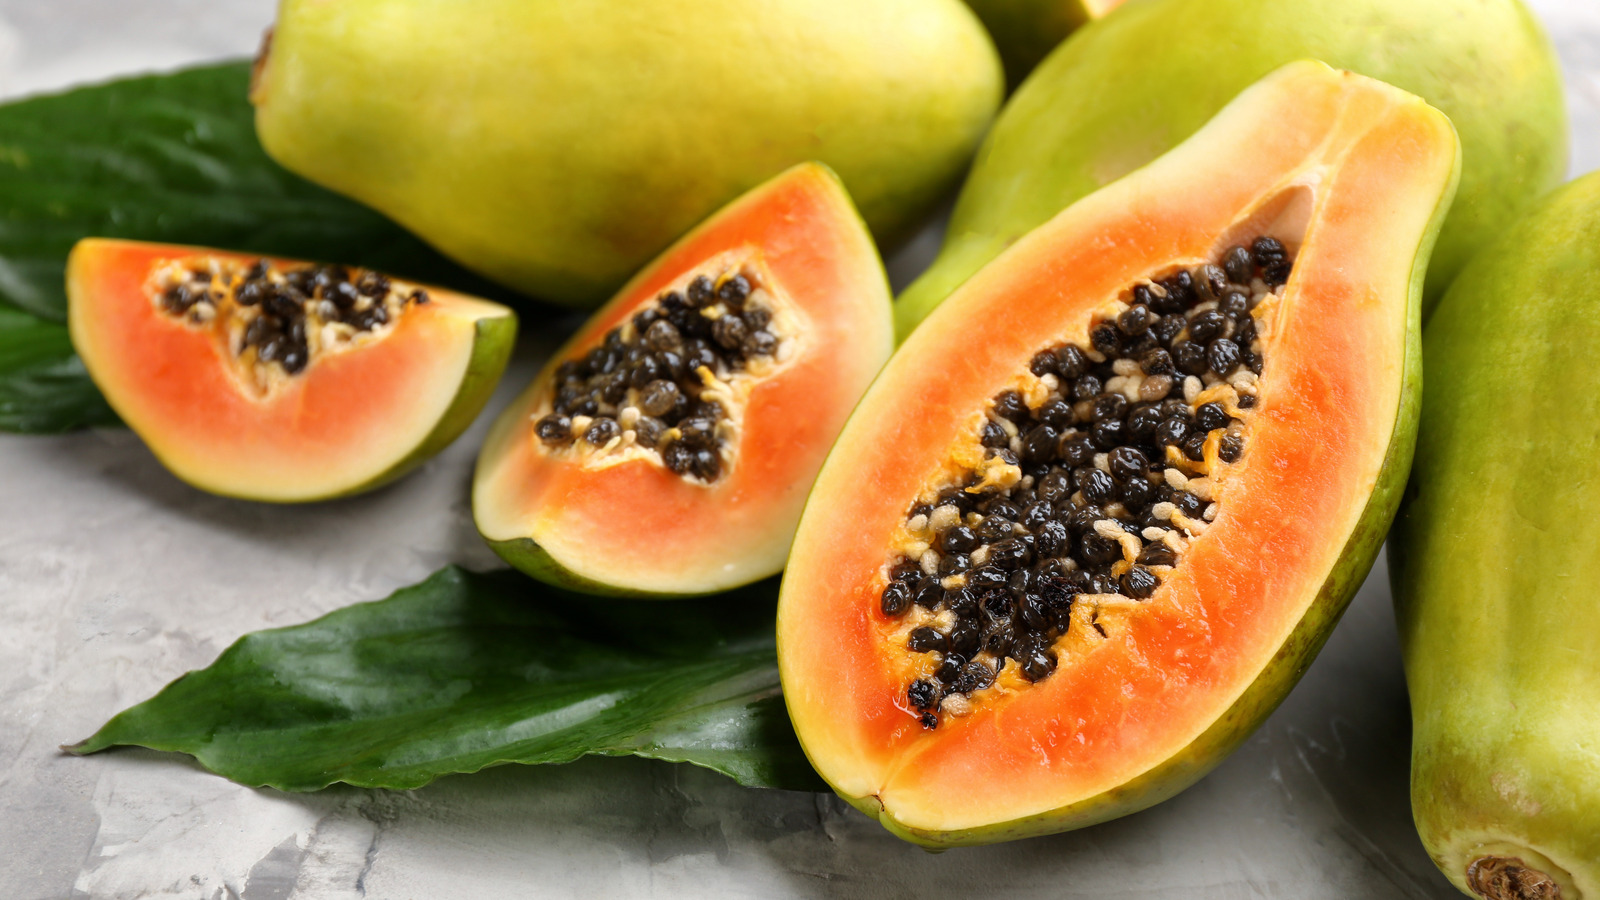 Here's Why You Should Stop Throwing Out Papaya Seeds